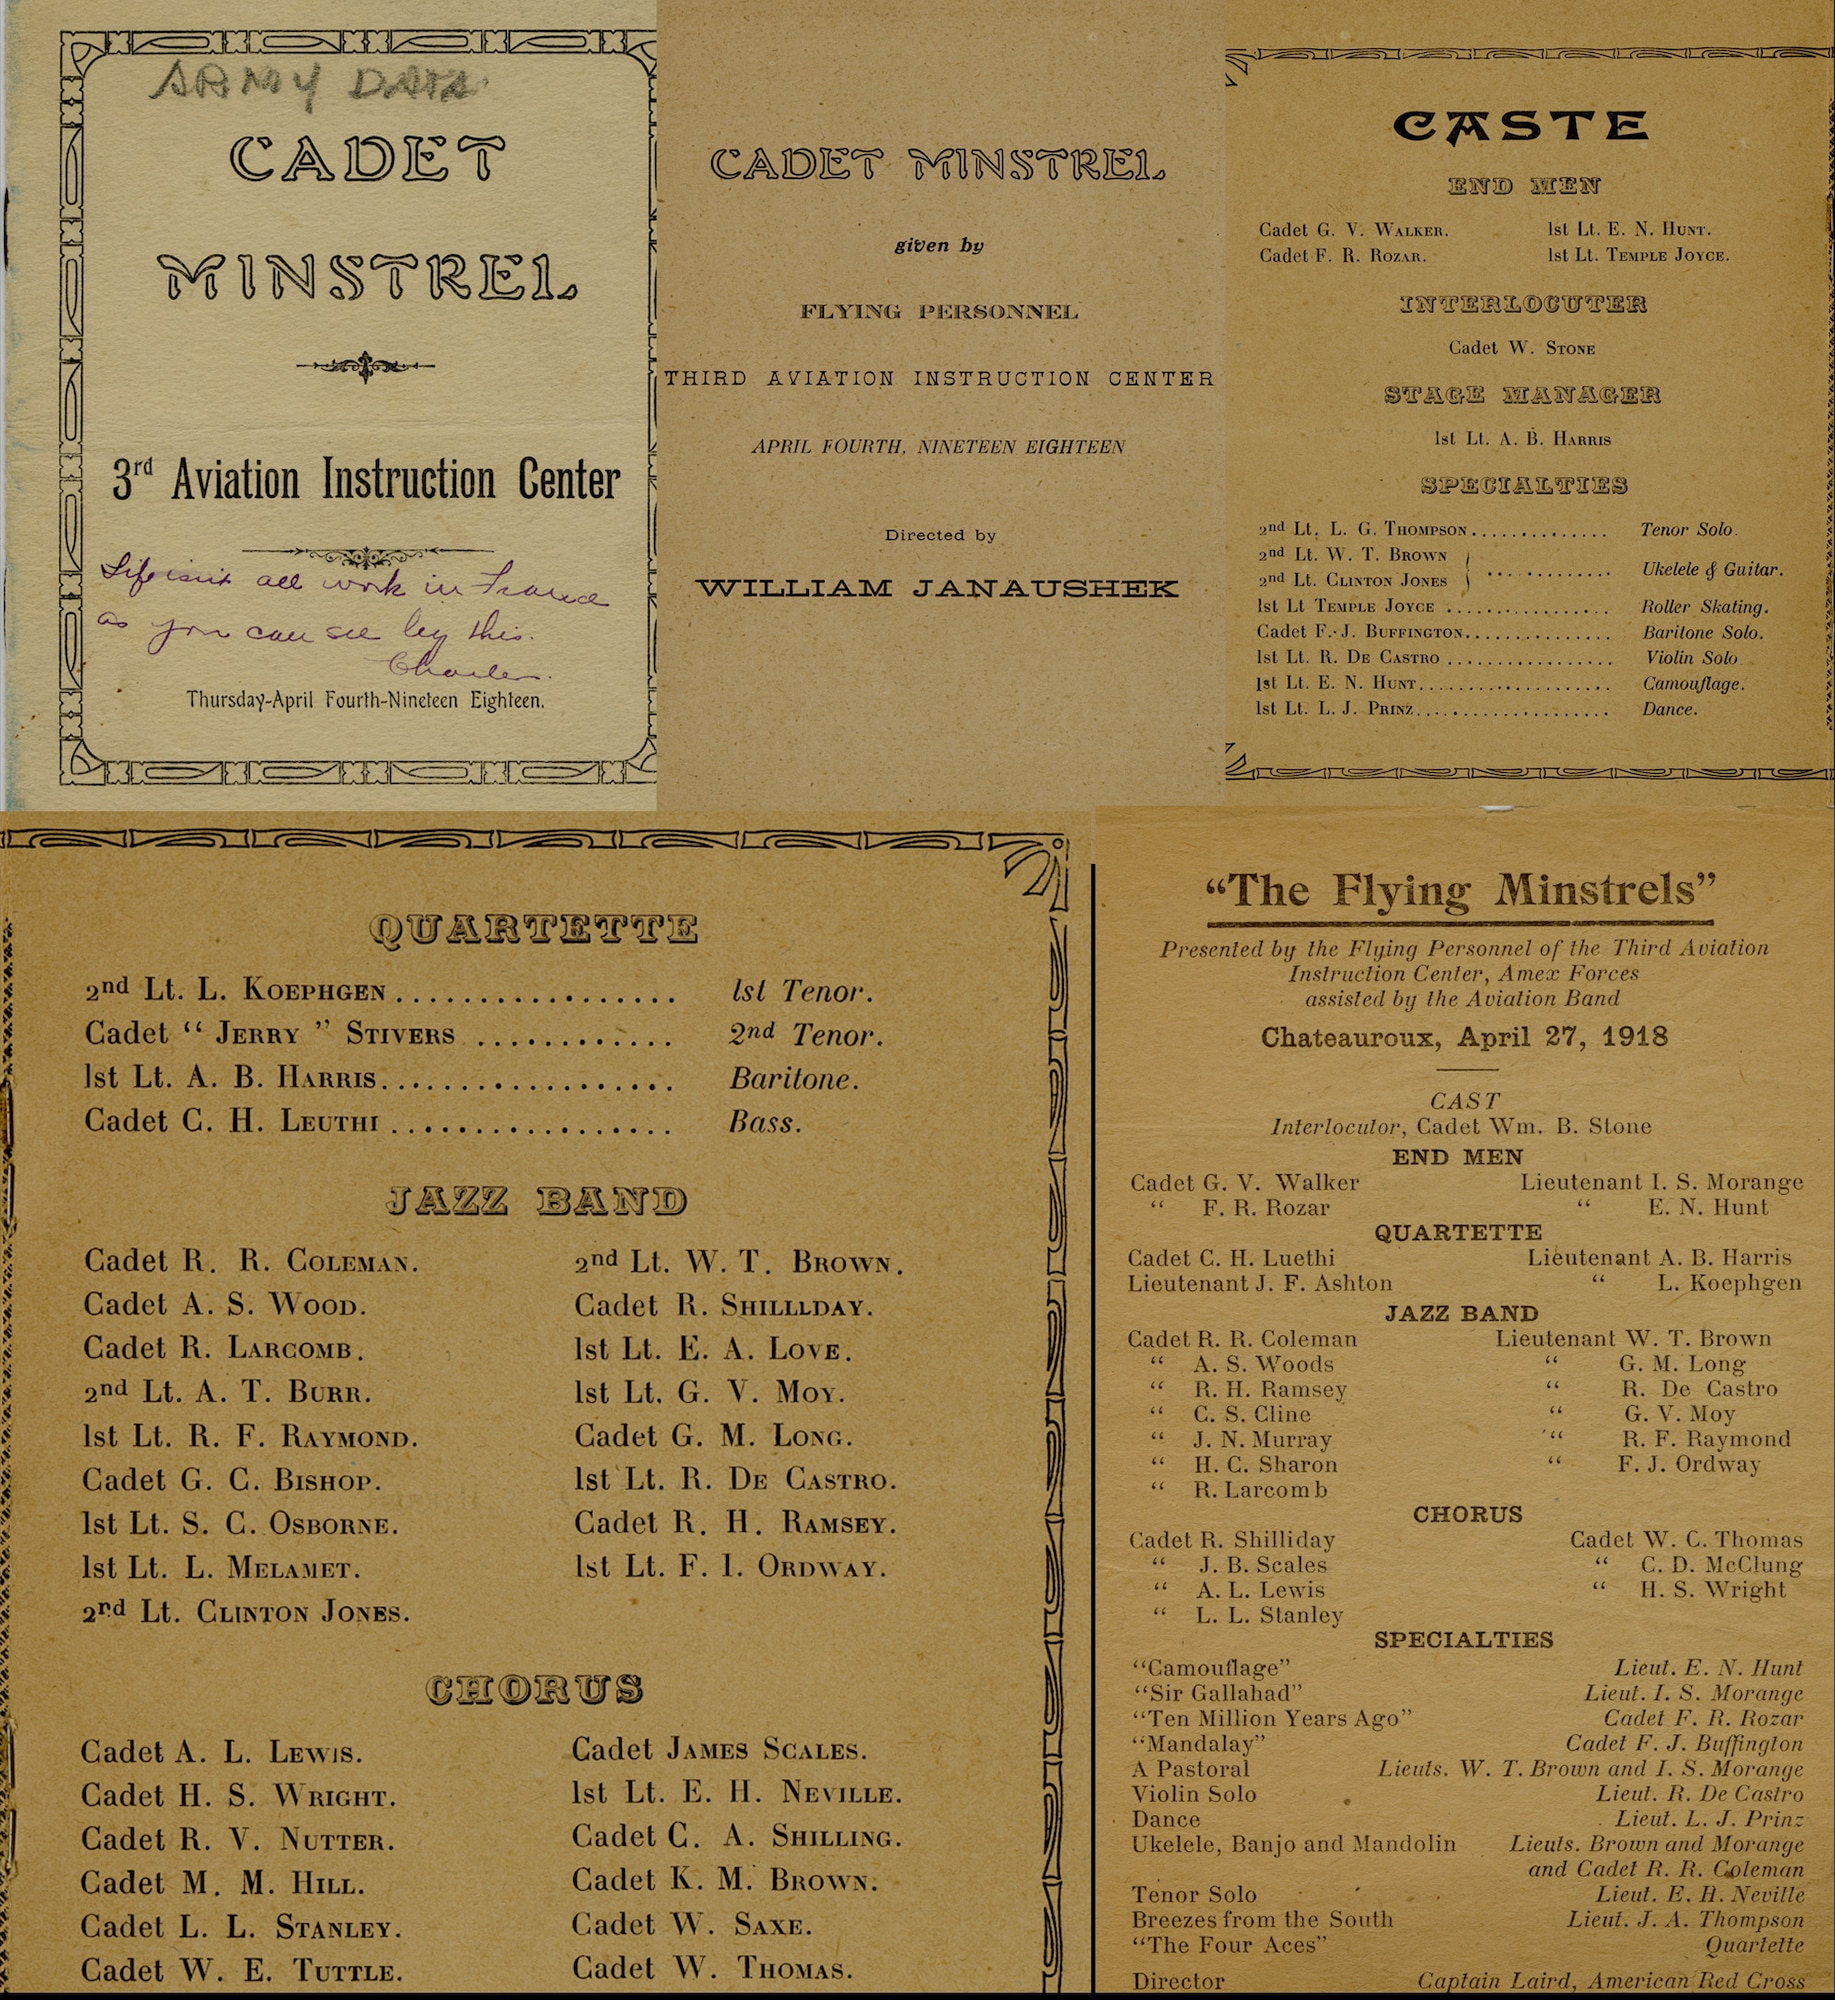 On April 4, 1918, a special musical performance was conducted by the flying staff and cadets to raise morale and break the monotony of the daily flying regimen.  A short program for this event was distributed to attendees and identified all the participating musicians.  Enclosed within the program is a leaf for a follow-on performance by many of the same musicians held at Chateauroux, France a few weeks later on April 27, 1918. This collage shows all pages of the program. (U.S. Air Force image)